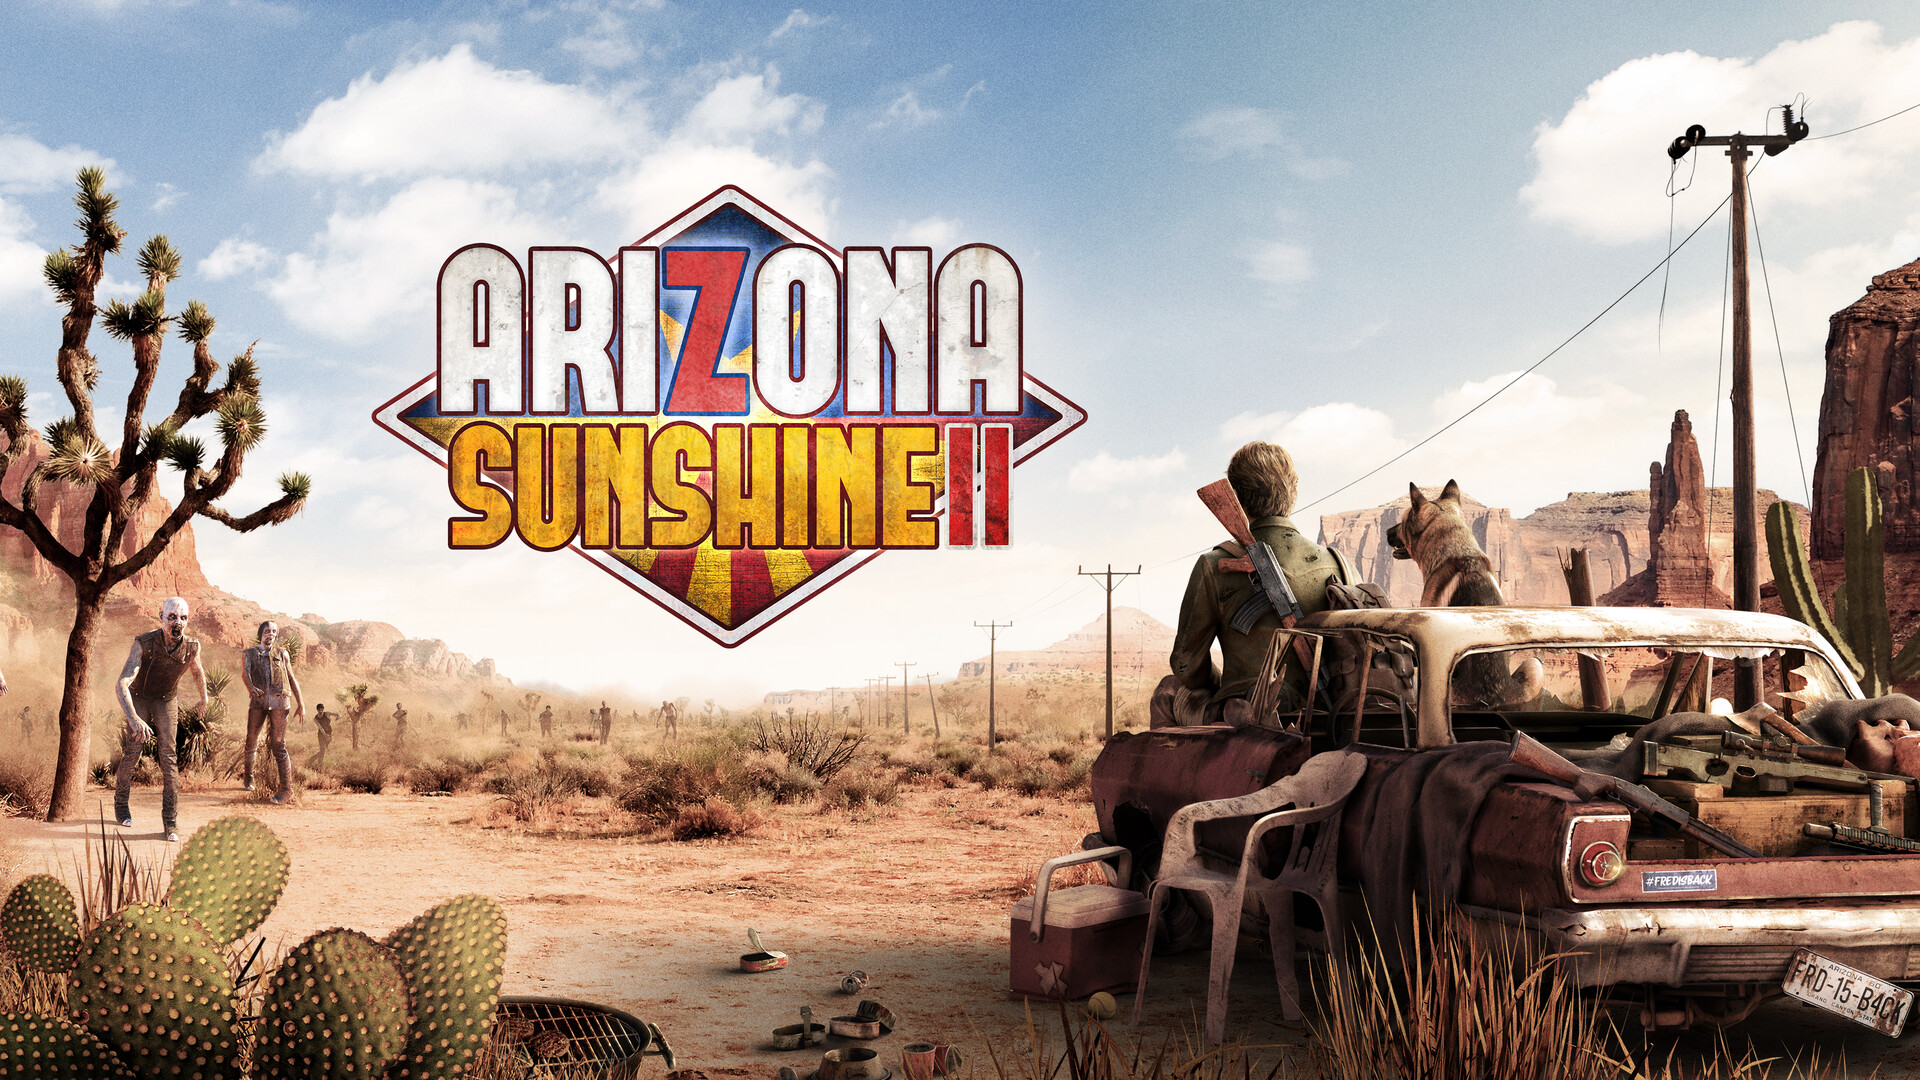 Classic VR Zombie Shooter ‘Arizona Sunshine’ Sequel Revealed for PSVR 2 & PC VR – Road to VR